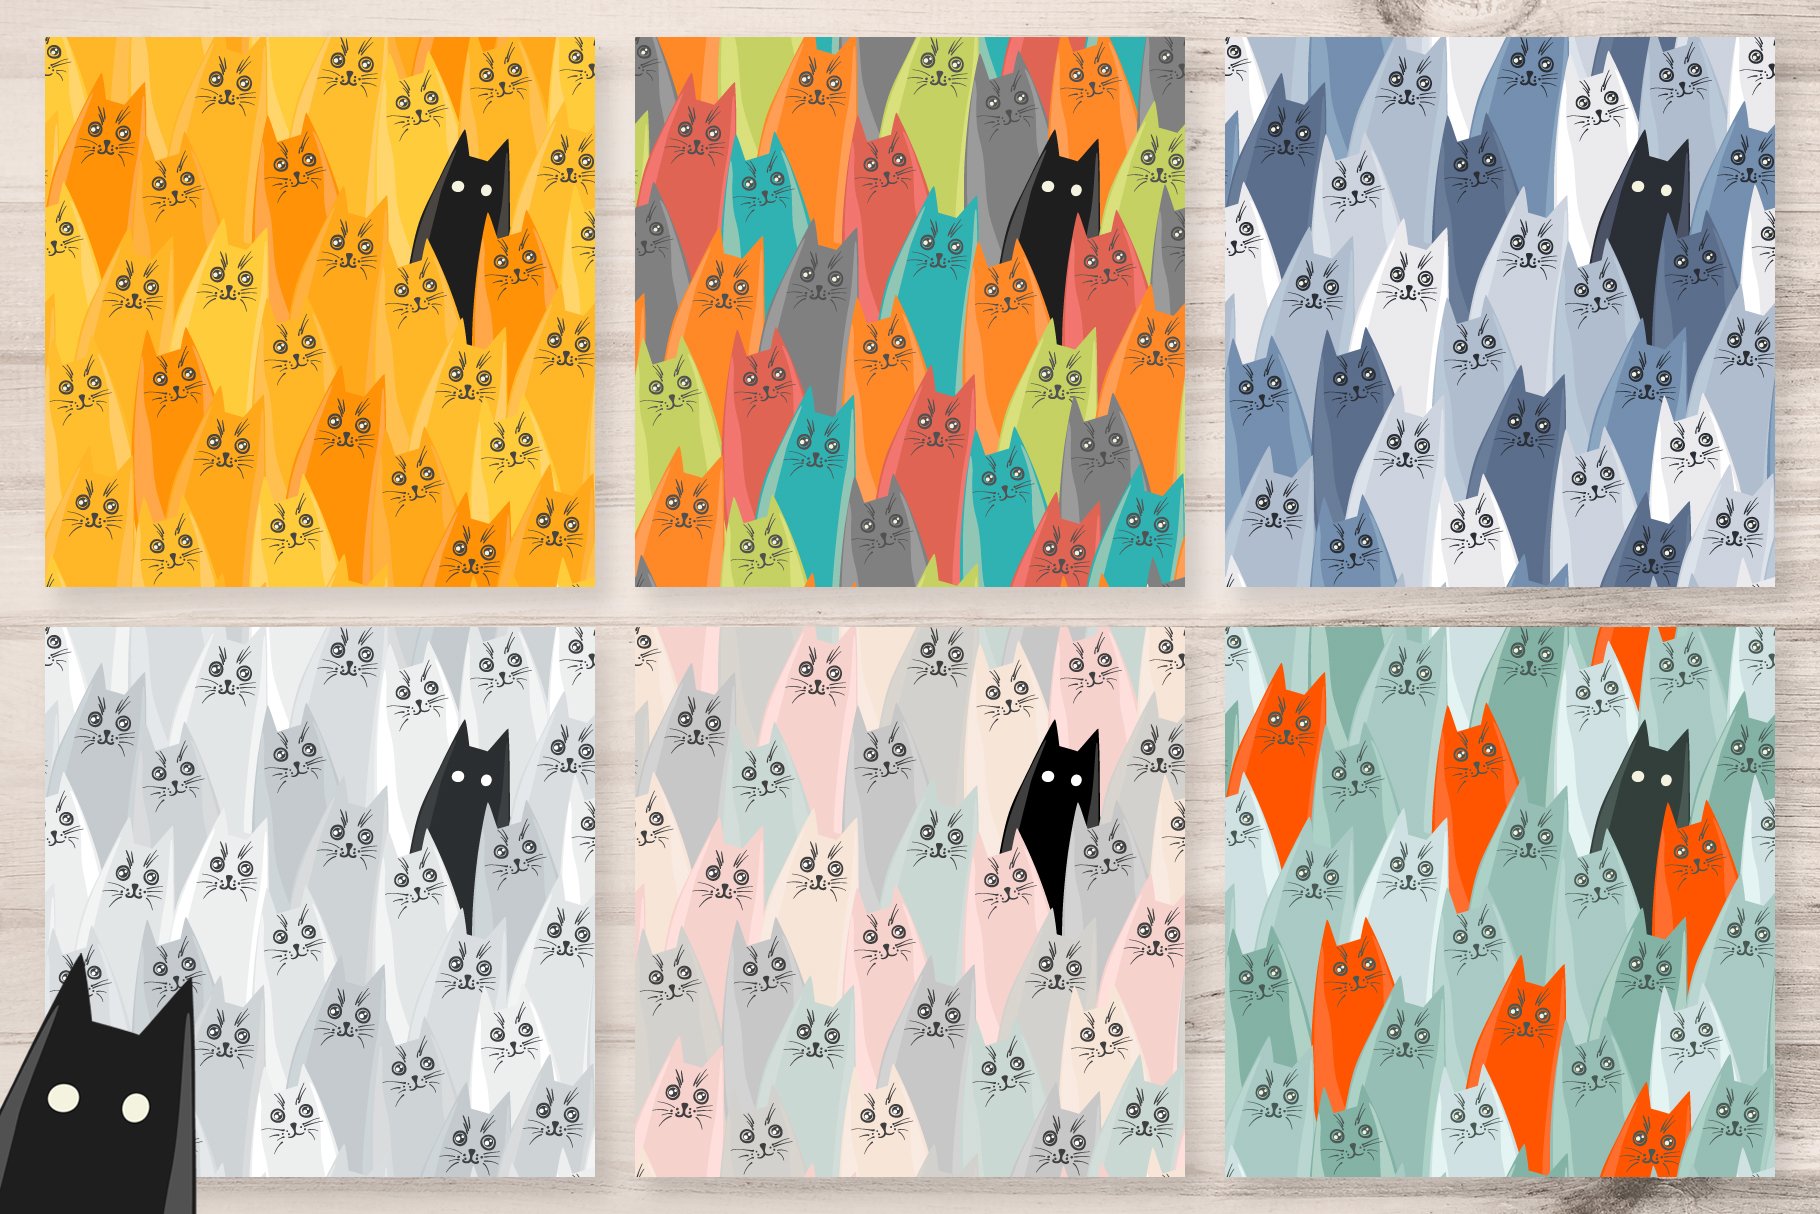 A few options of cats illustrations in different colors.